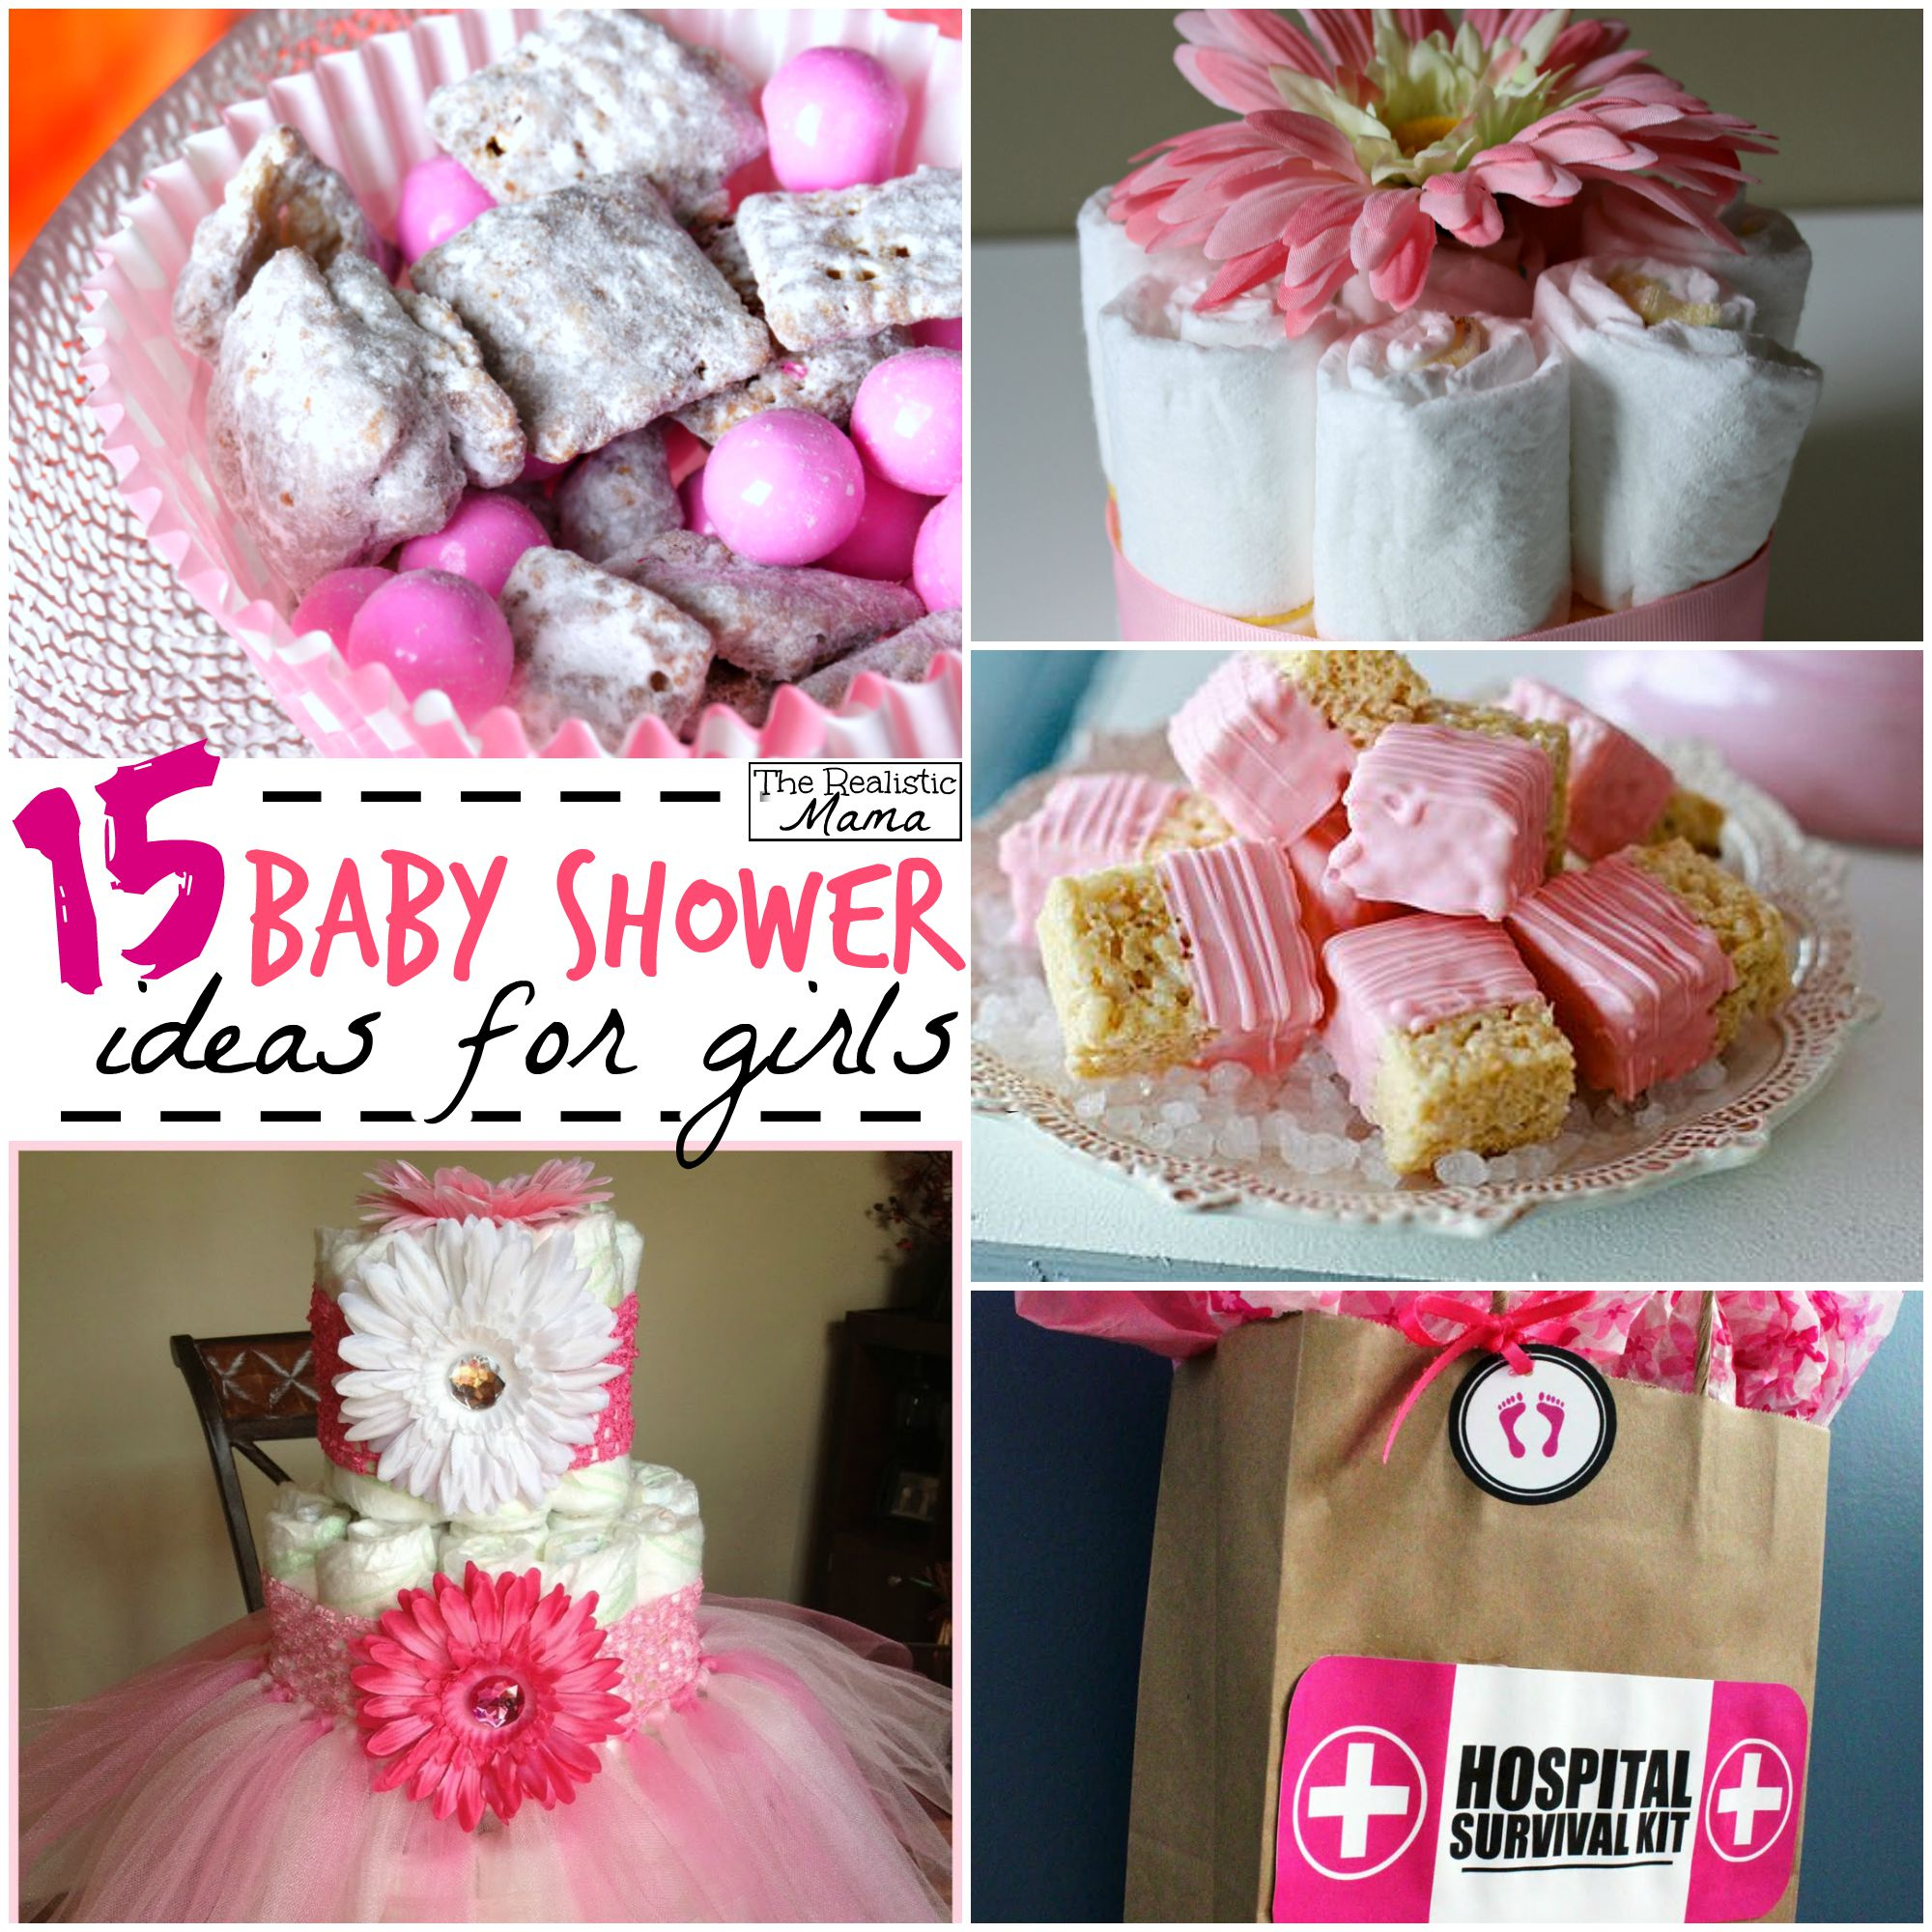 10 Most Recommended Idea For A Baby Shower 15 baby shower ideas for girls the realistic mama 26 2022